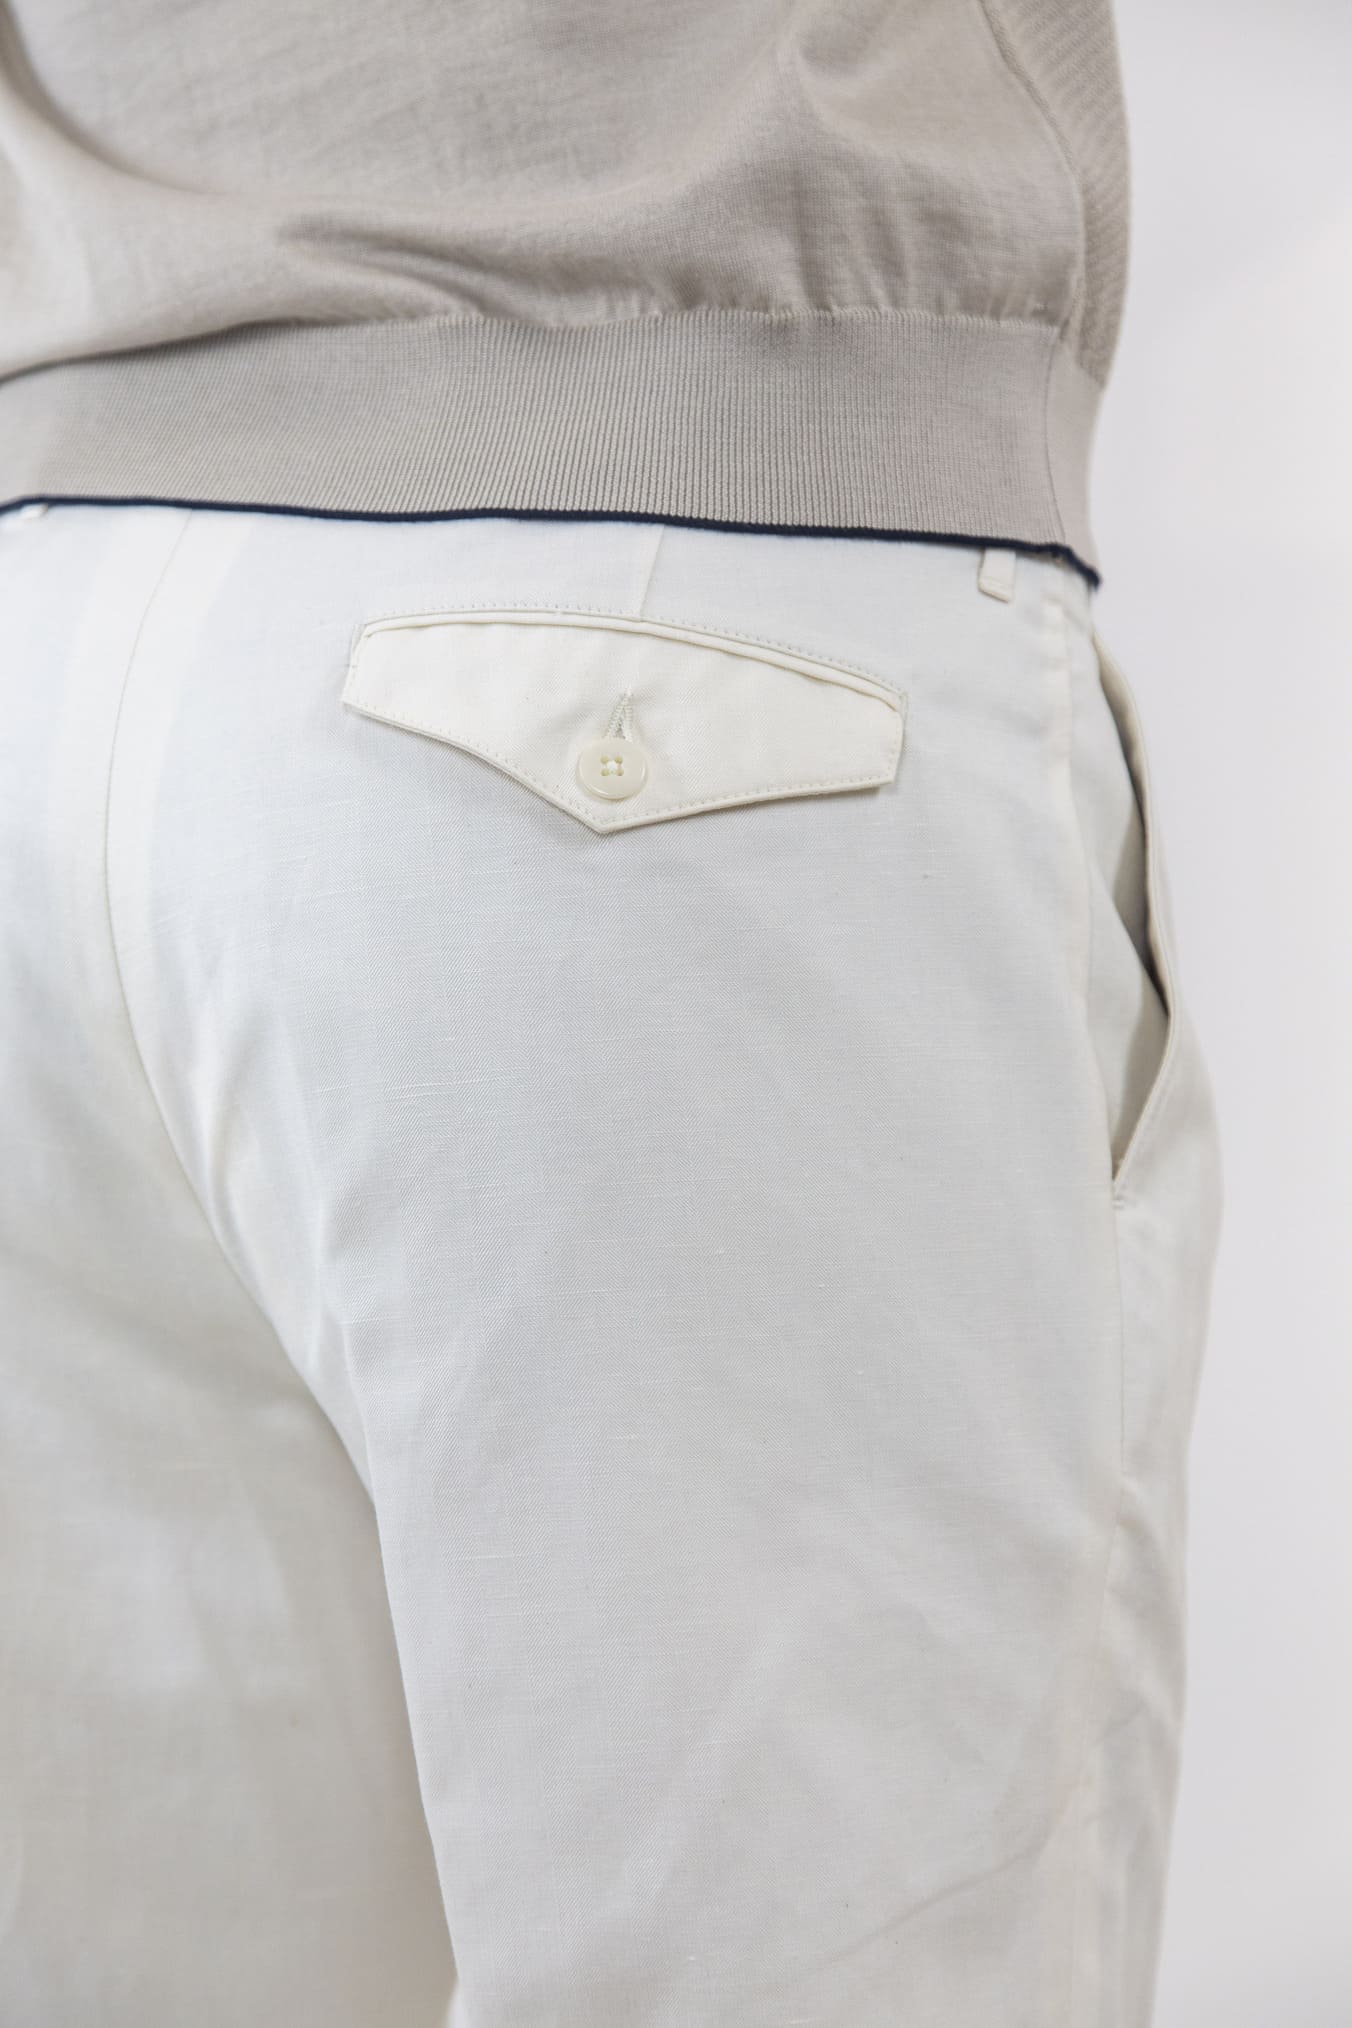 HINDUSTRIE Creamy White Cotton and Linen Trousers